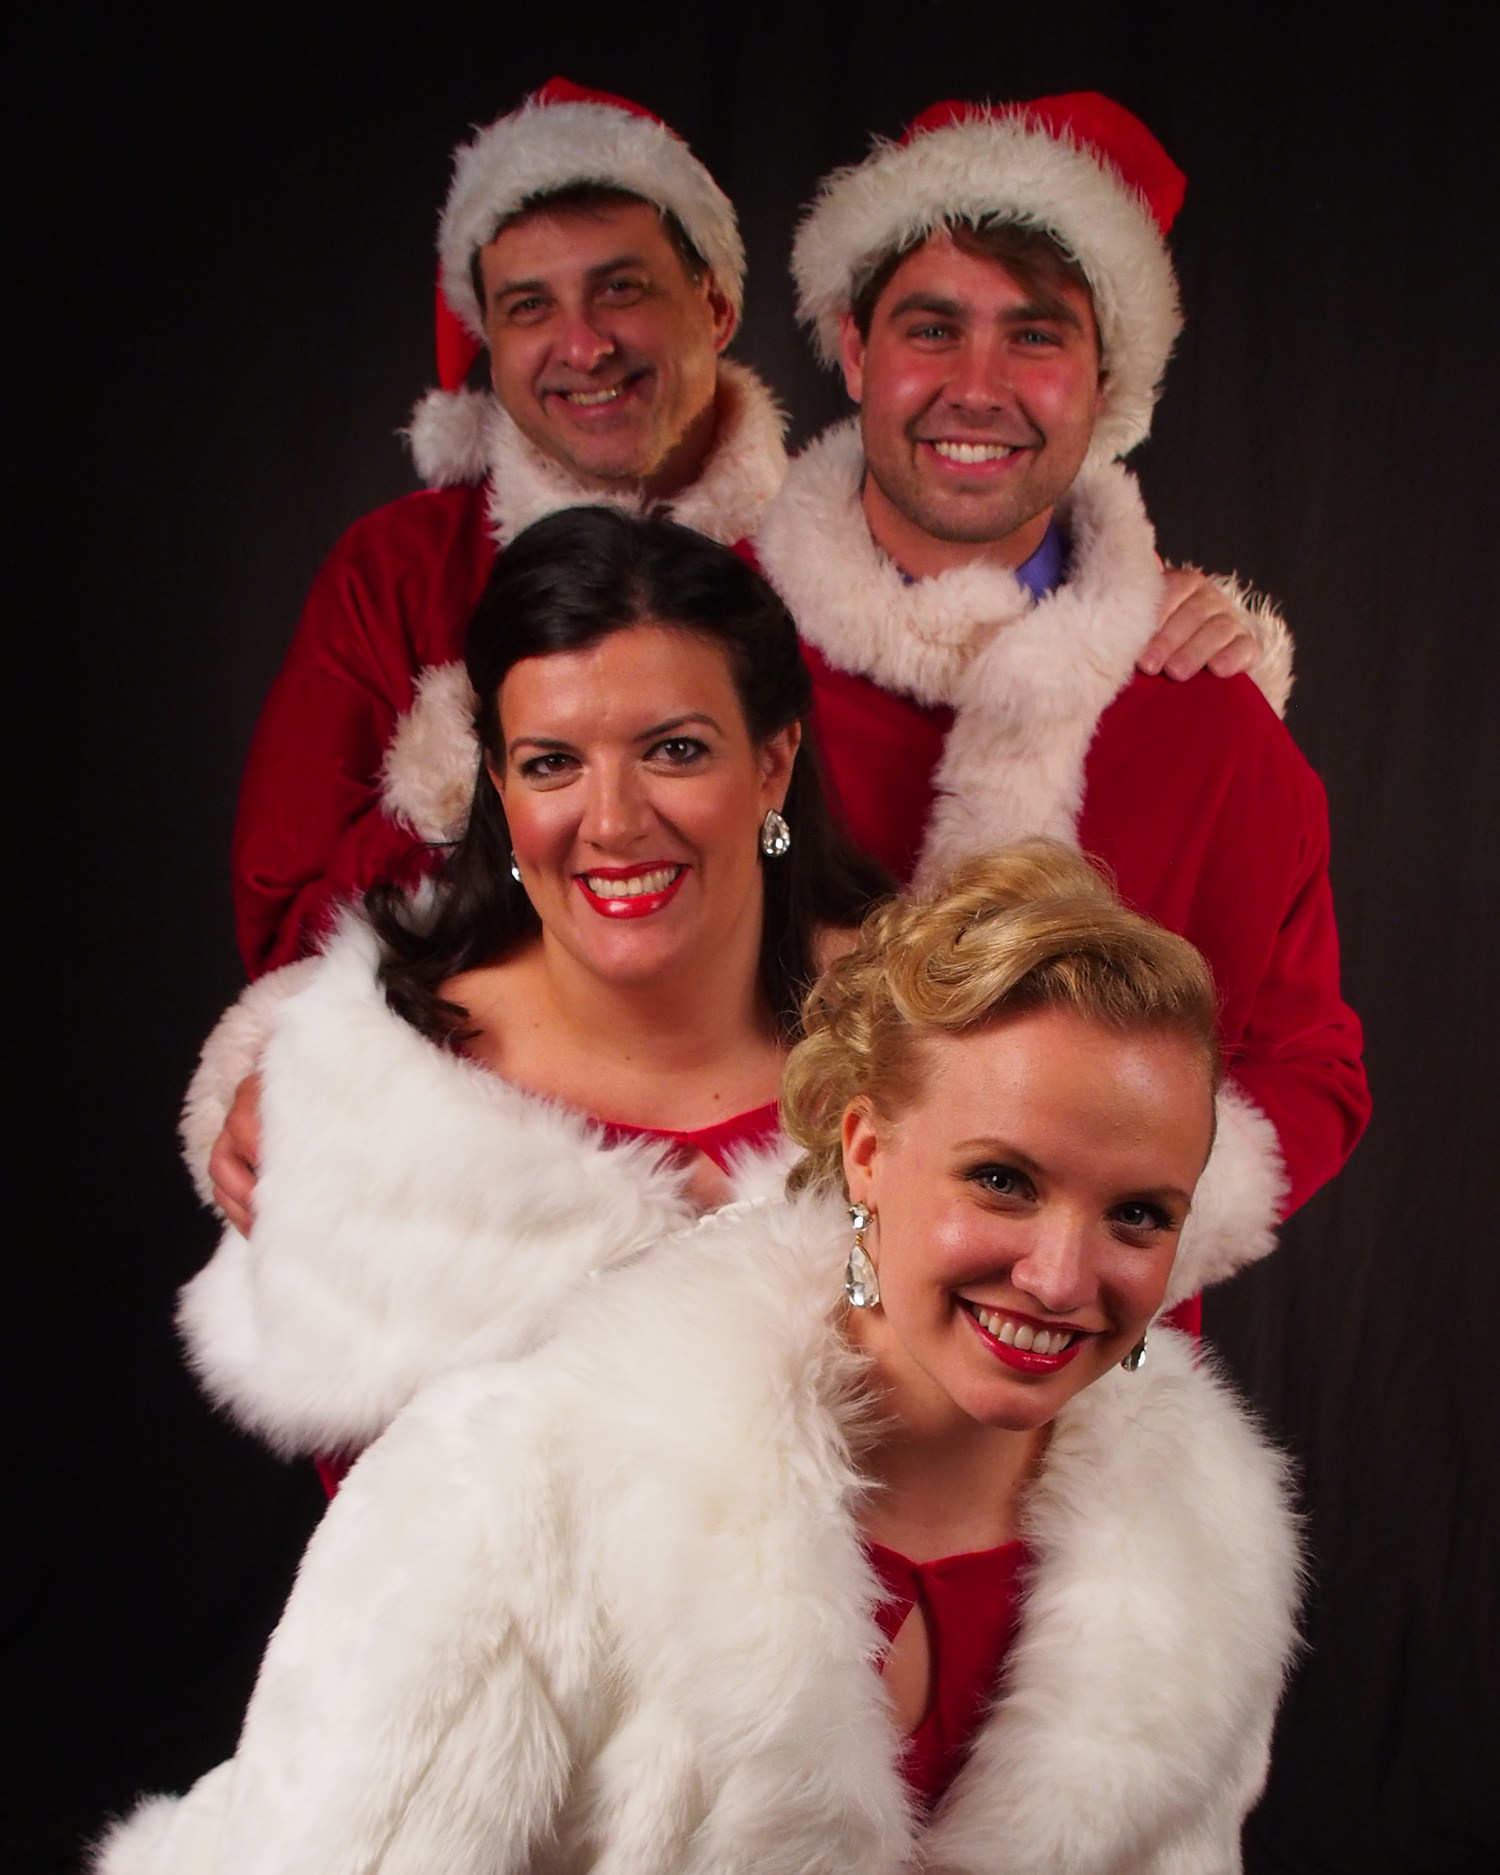 Golden Age Holiday, photo by Dale Pegg:
From top, Tom Pagano of Clinton Township, Robby Mullinger of Grosse Pointe, Danielle Caralis of Birmingham, and Catie Hauff of Richmond are among the nine-member cast in Grosse Pointe Theatre’s “A Golden Age Holiday” benefit performance on Sunday Dec. 16 at The ARK at St. Ambrose, in Grosse Pointe Park. The fundraiser will also include an exciting silent auction and raffle. Proceeds from the gala will support Grosse Pointe Theatre's performing arts program. Seating is limited. To reserve tickets, visit www.gpt.org or call 313-881-4004.
